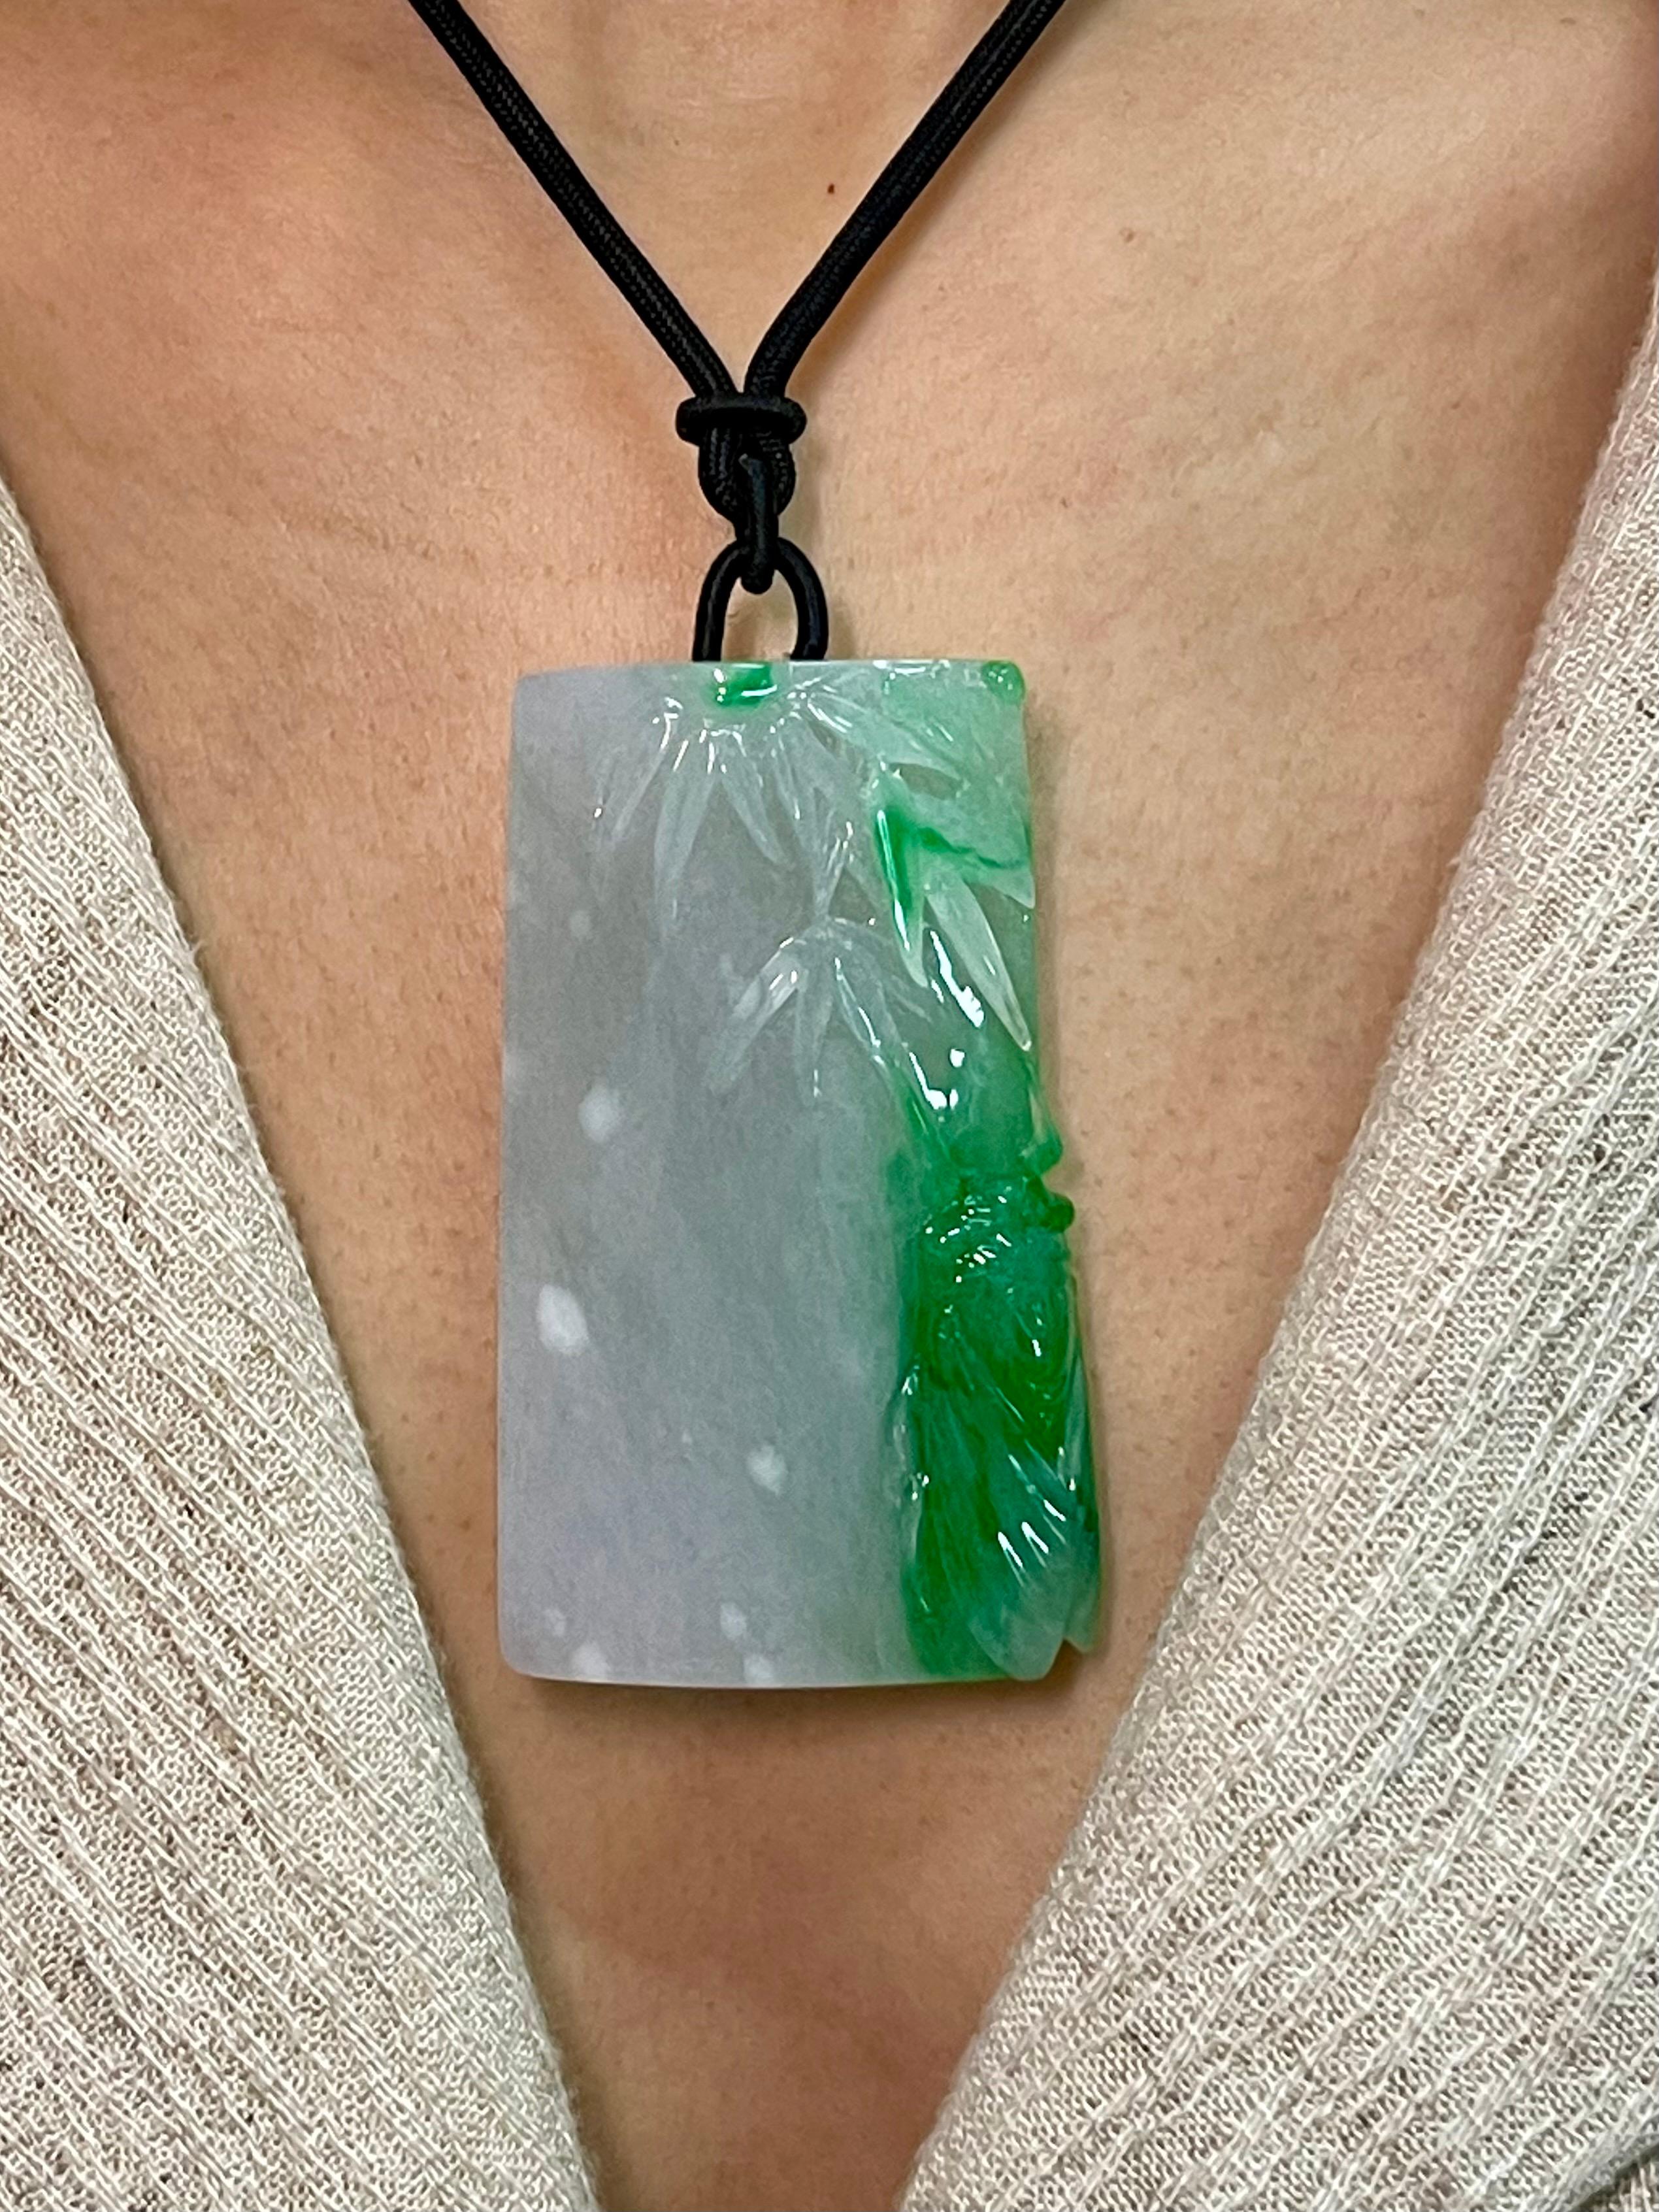 Please check out the HD video. This is certified natural jadeite jade by two labs. The carved jade Cicada and bamboo pendant is classically strung with a traditional cord. It is well carved on both sides. Cicada carvings symbolizes immortality and